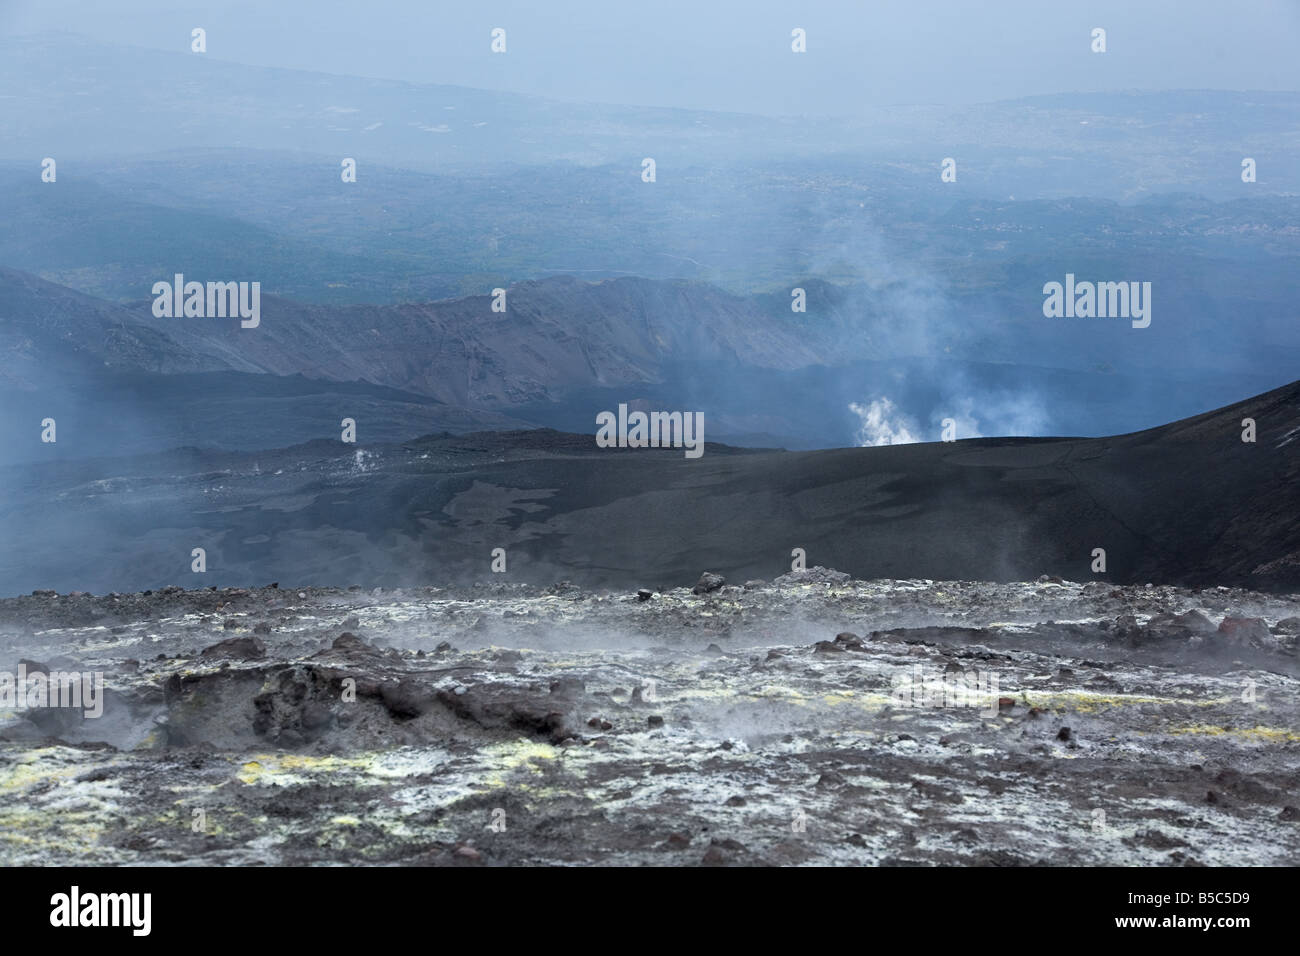 View down into Valle del Bove from the upper flanks of Mt. Etna volcano, smoke from the active eruptive fissure in the centre. Stock Photo